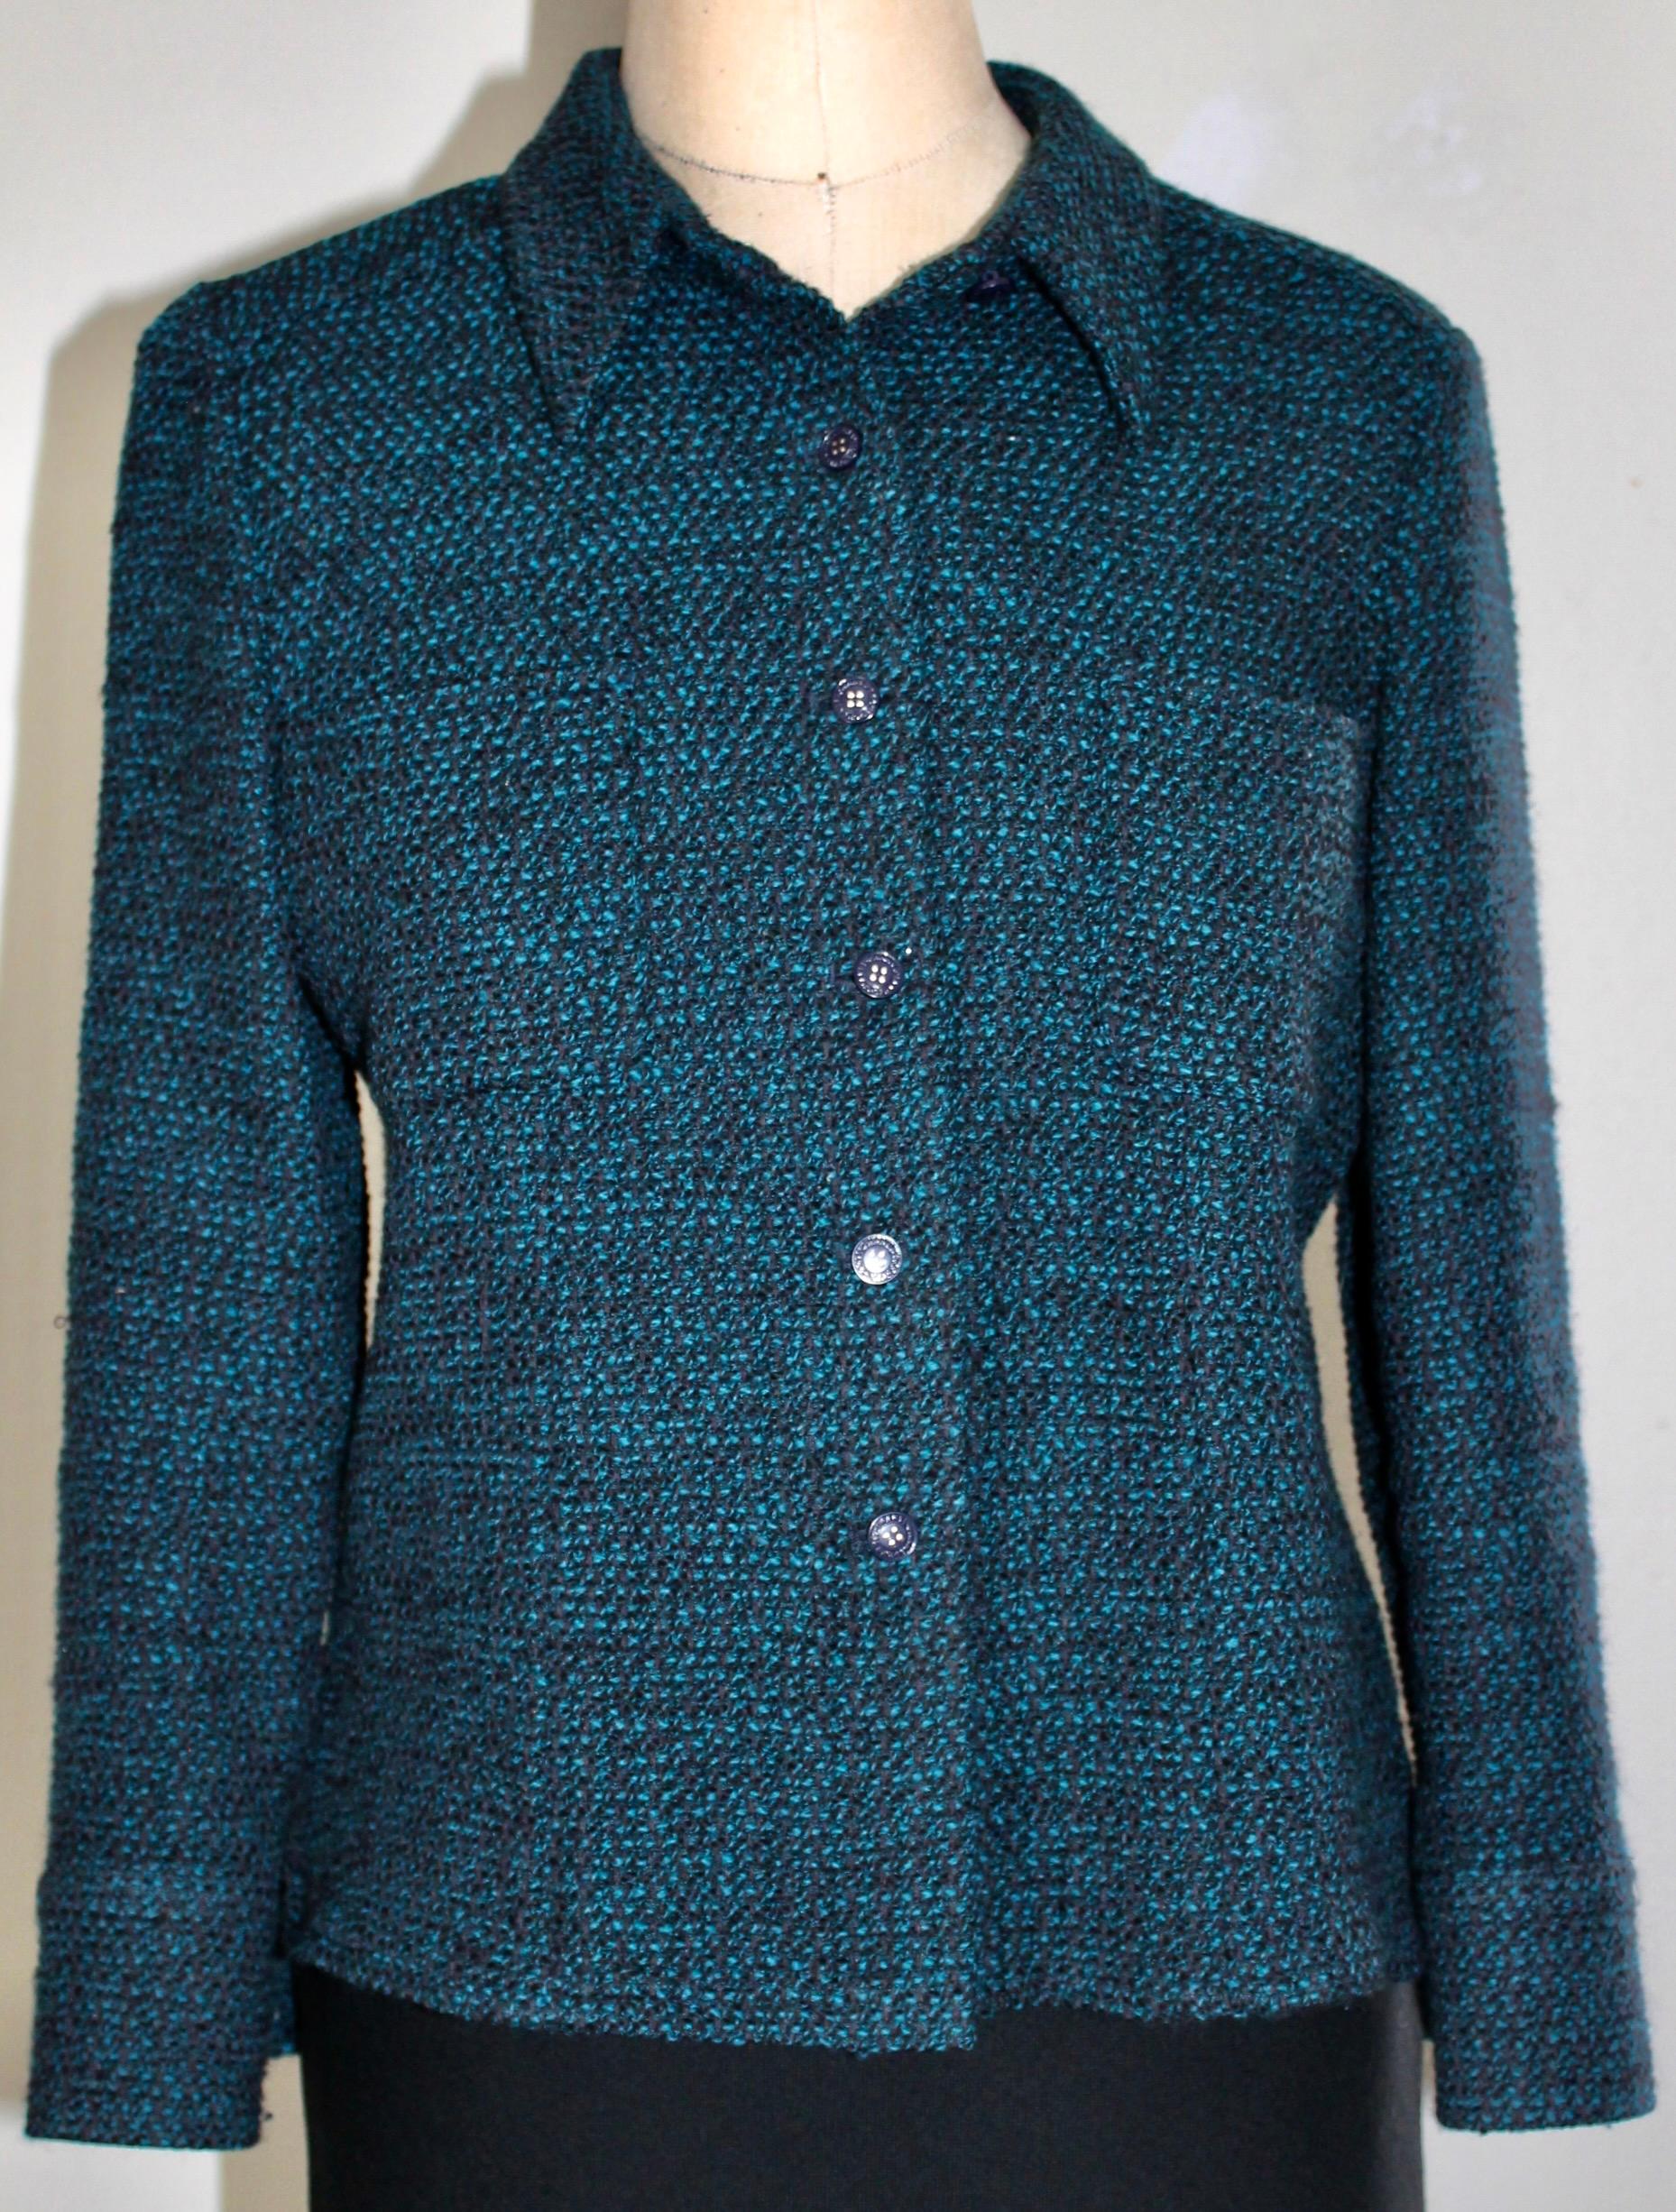 Chanel Tweed Jacket In Good Condition For Sale In Sharon, CT